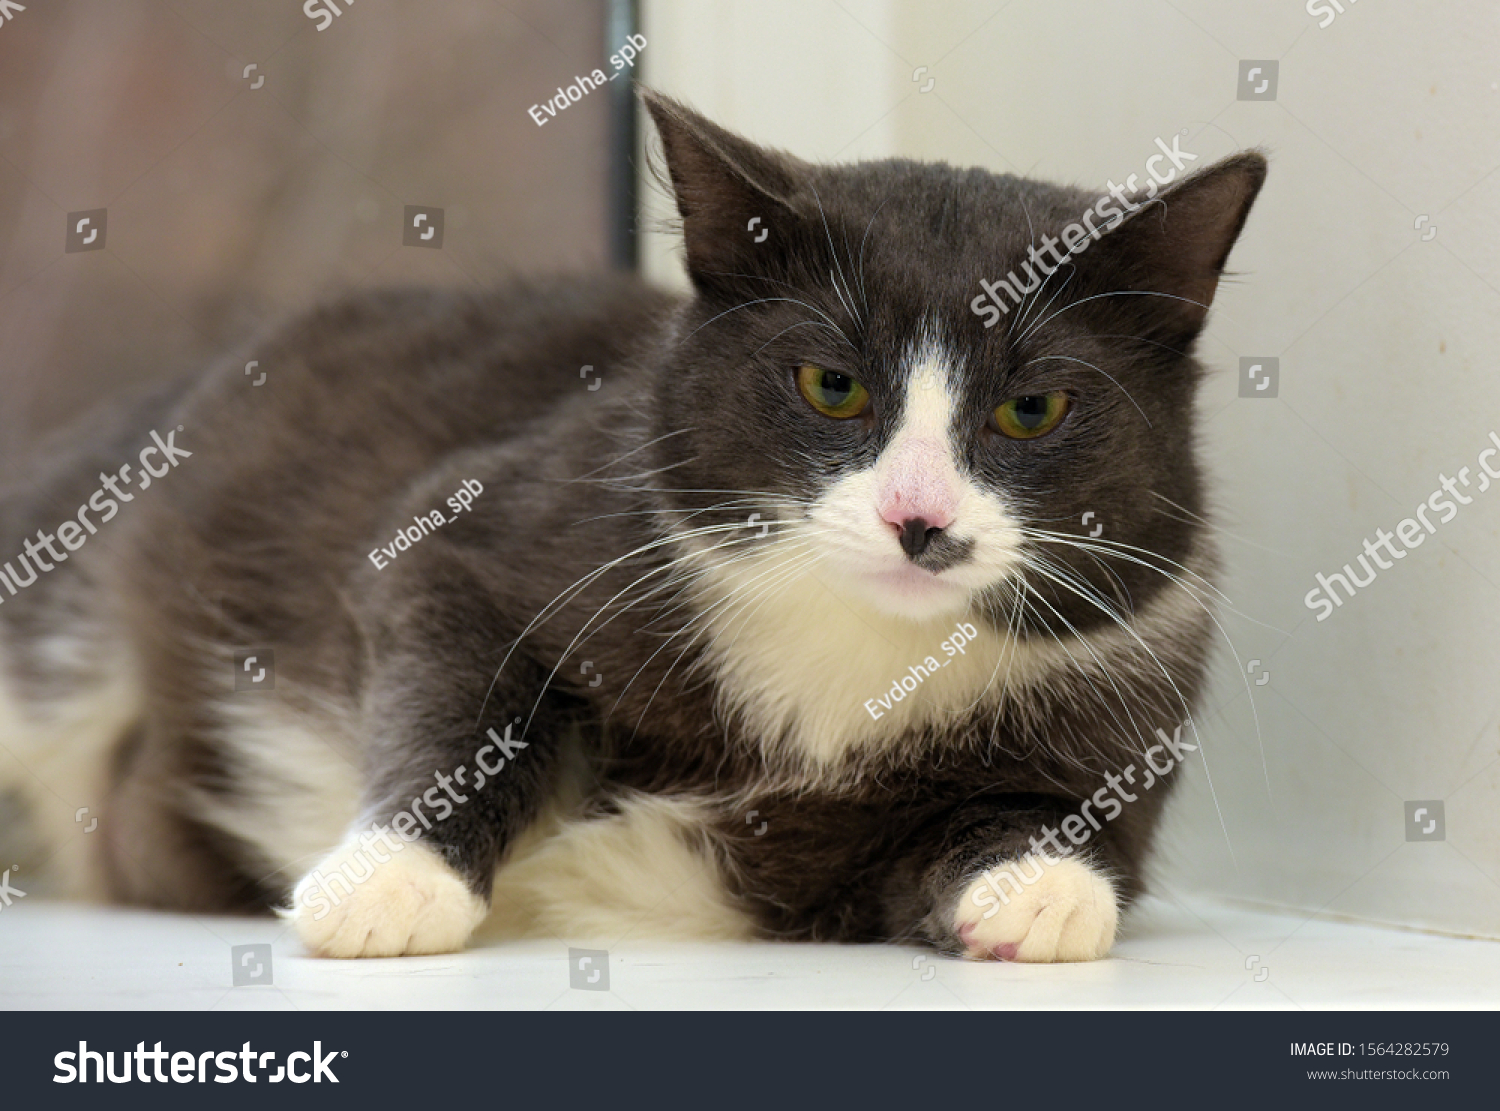 gray with white plump cat portrait #1564282579